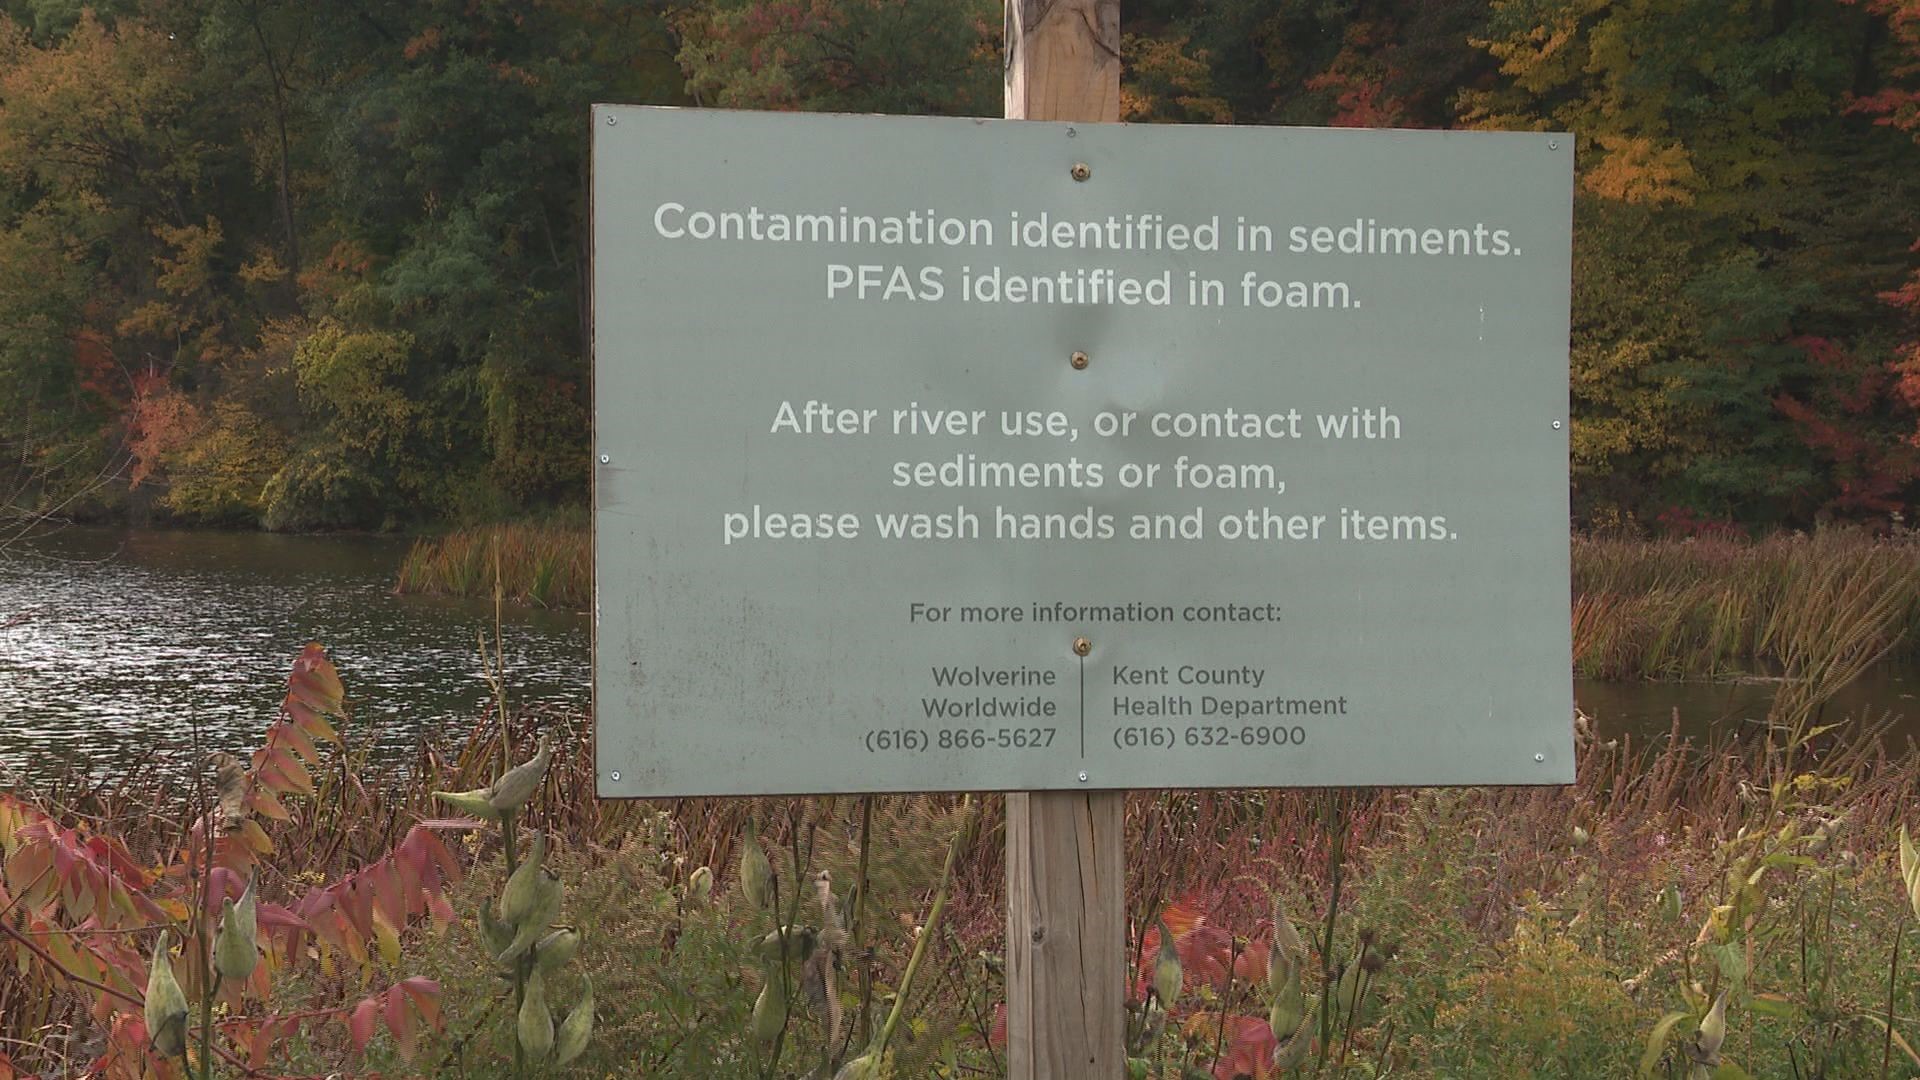 During a walking tour of the Rogue River Wednesday, residents called for more awareness, cleaning river.